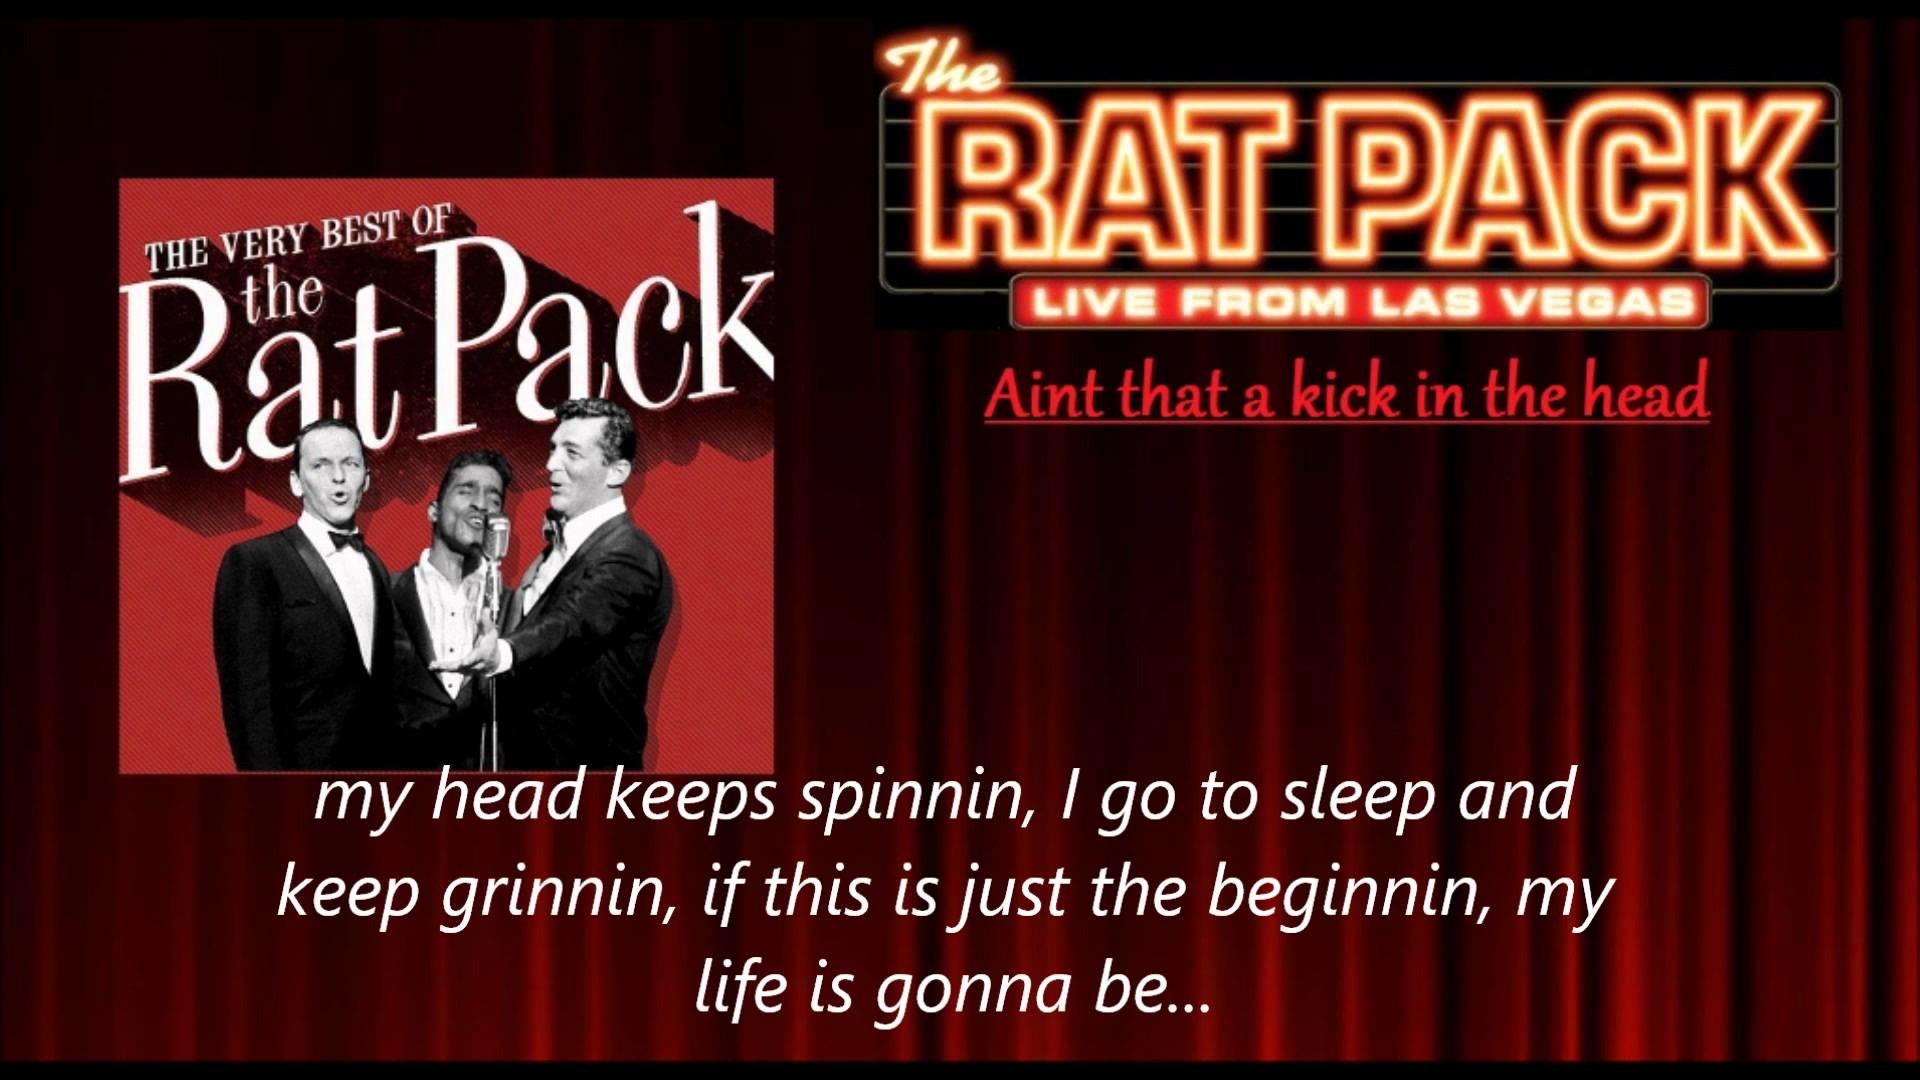 1920x1080 The Very Best of the Rat Pack - Dean Martin - Ain't that a kick in the head  HD - YouTube